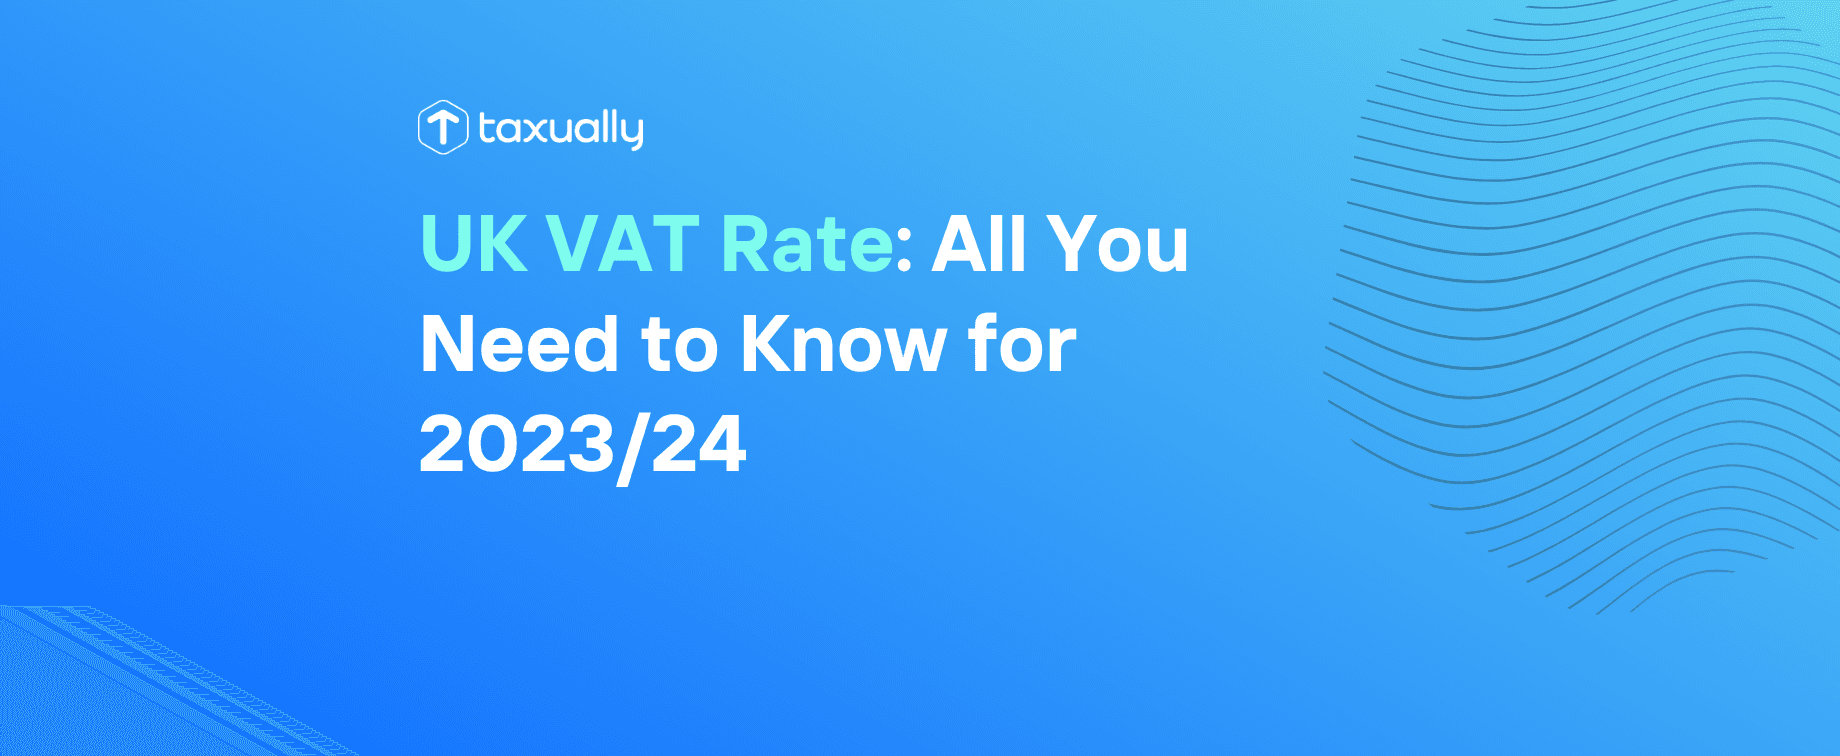 Taxually UK VAT Rate All You Need to Know for 2023/24